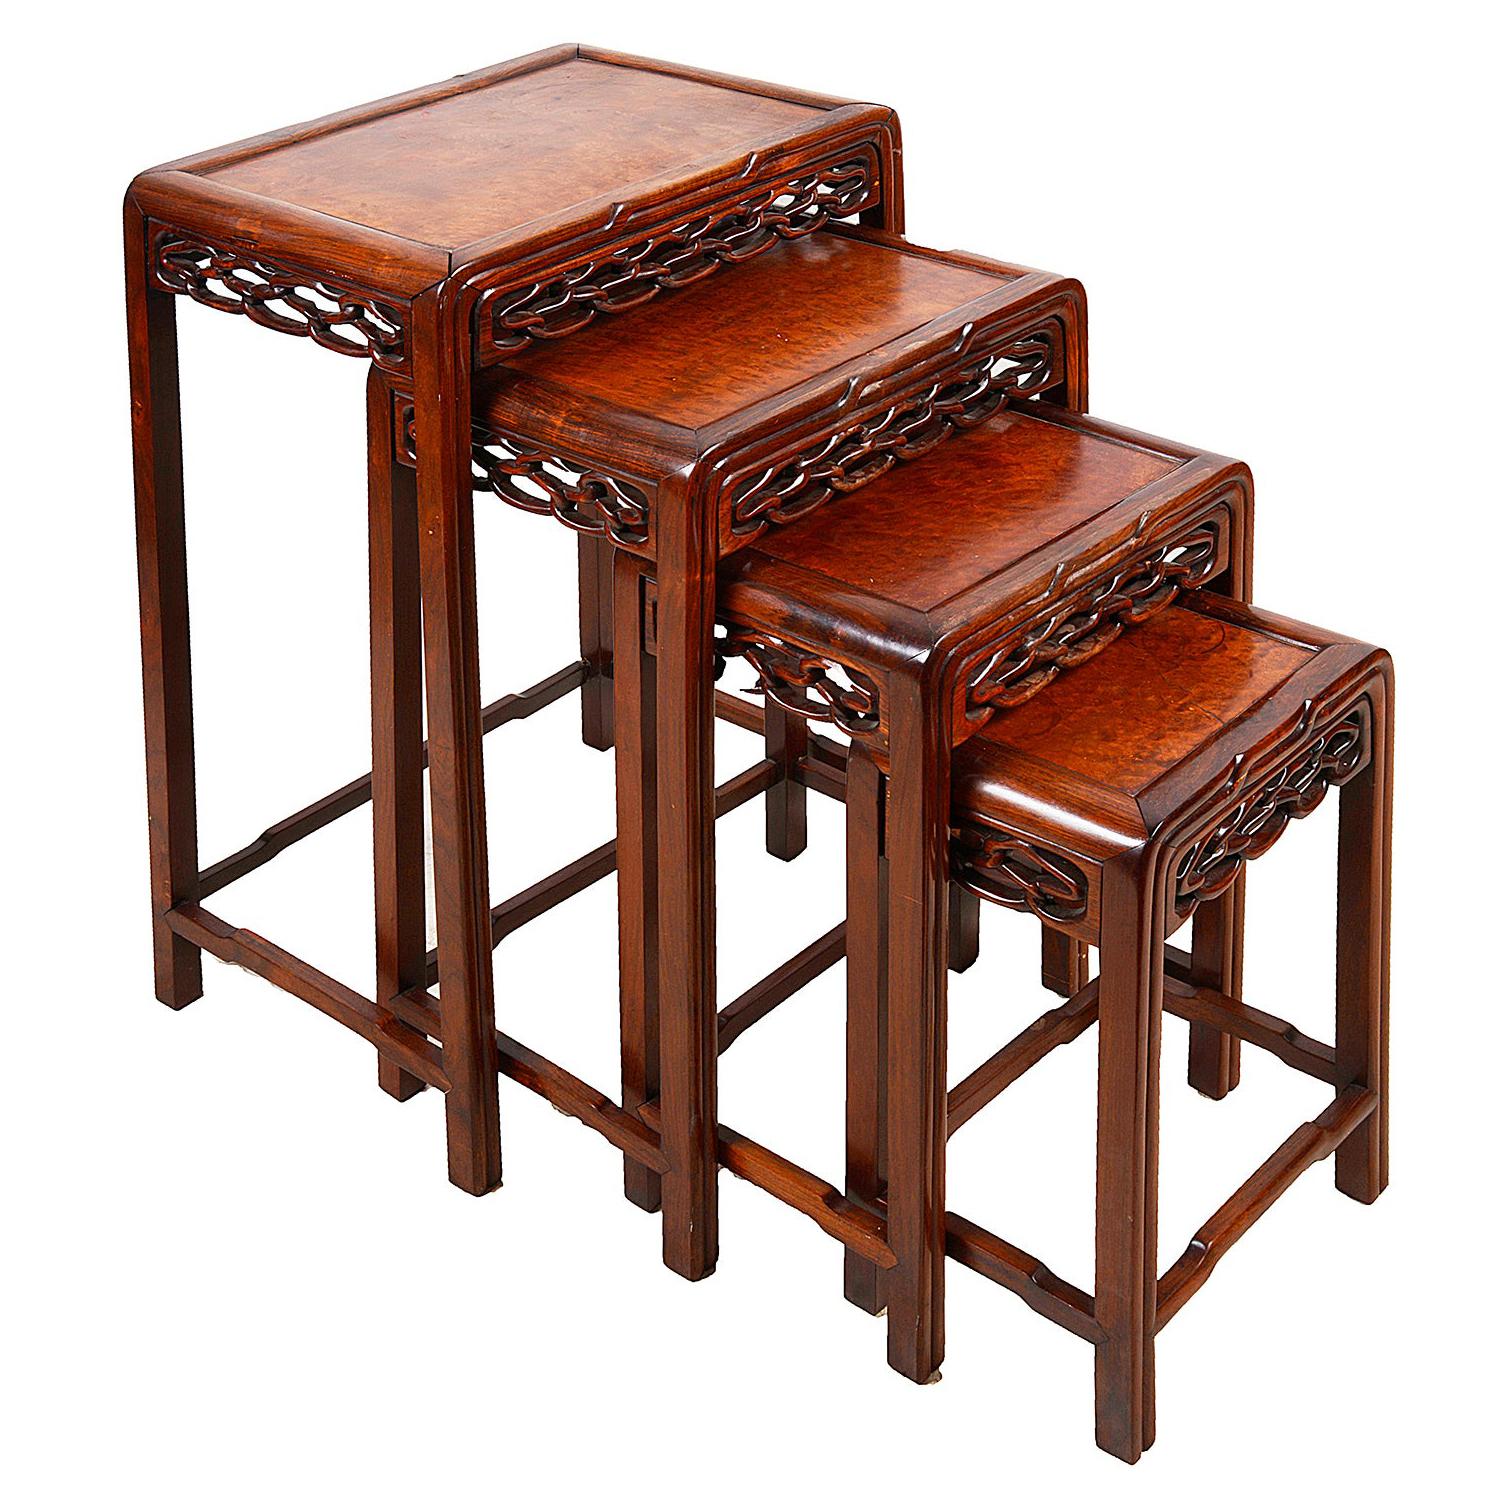 Nest of Four Chinese Hardwood Tables, 19th Century